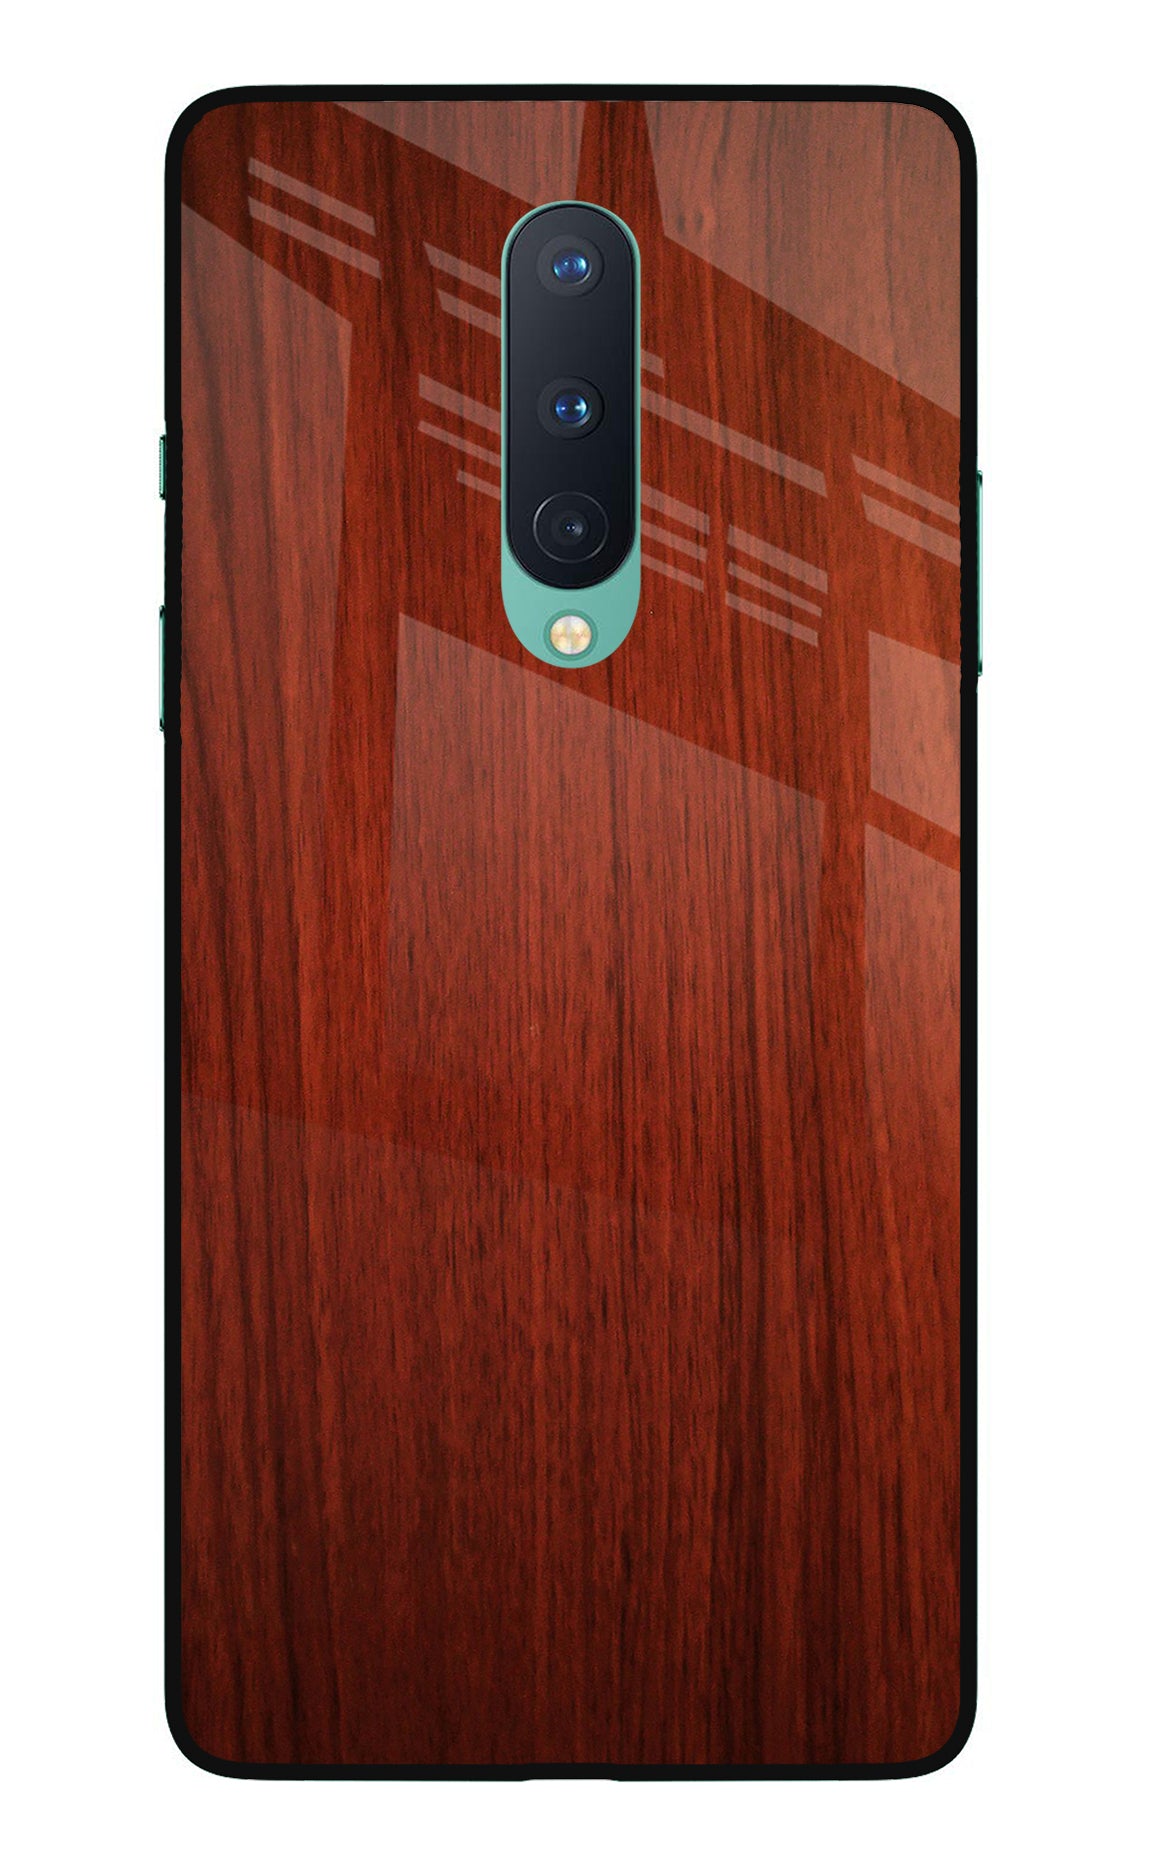 Wooden Plain Pattern Oneplus 8 Back Cover